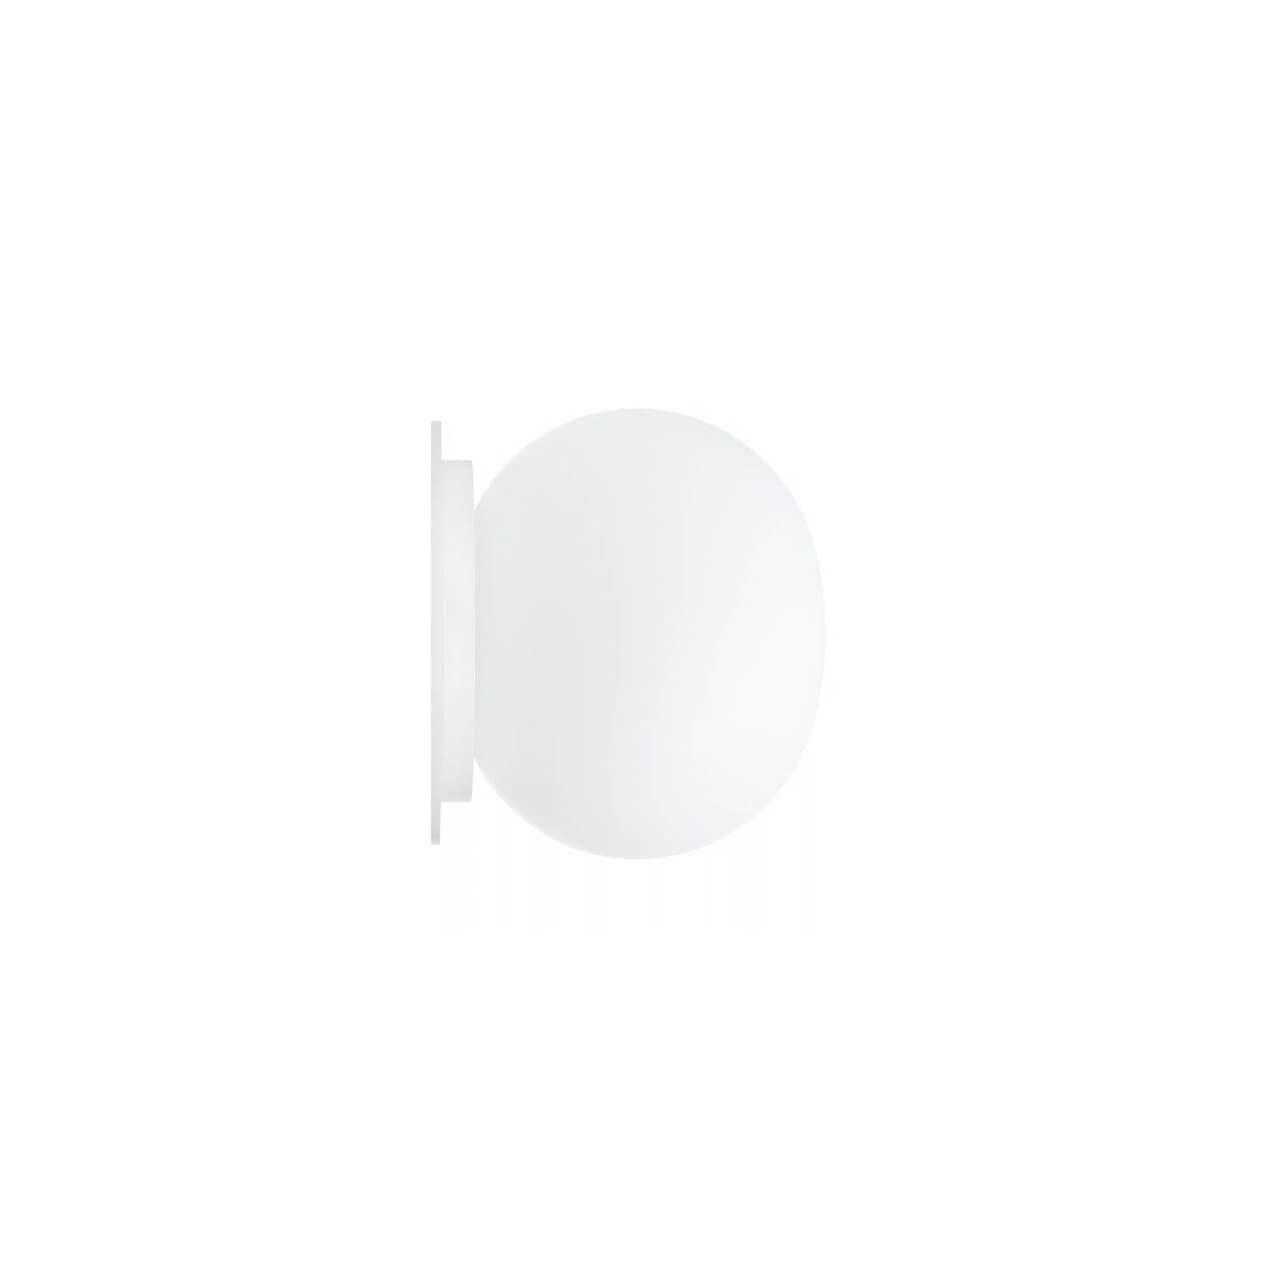 Mini Glo-Ball Ceiling and Wall Sconce Lamp - Curated - Lighting - Flos